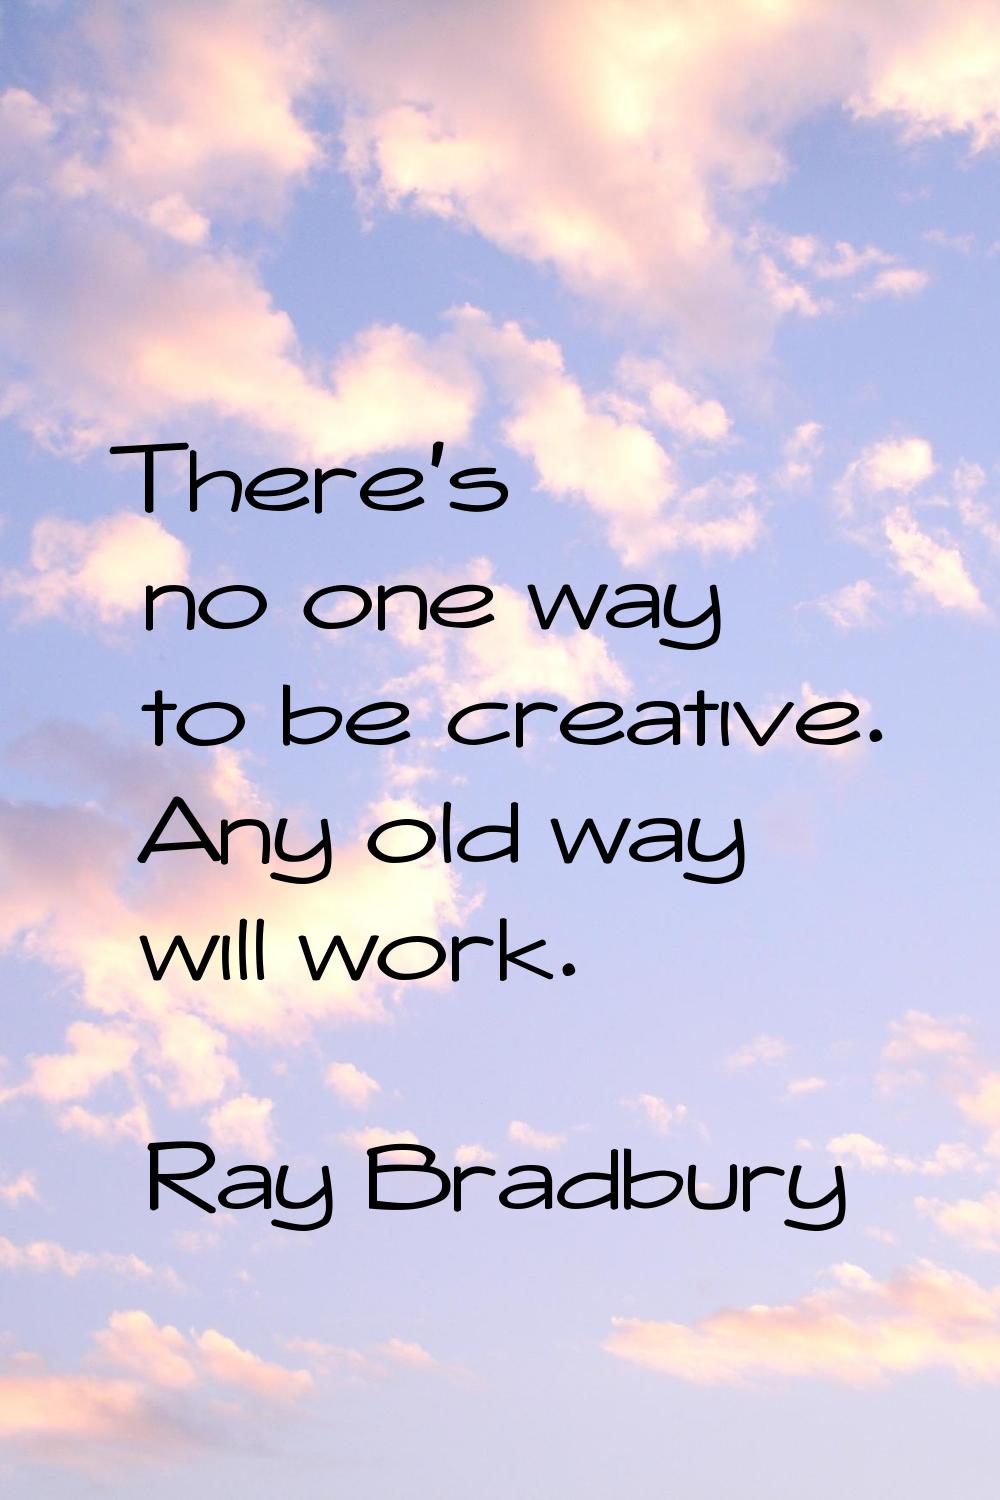 There's no one way to be creative. Any old way will work.